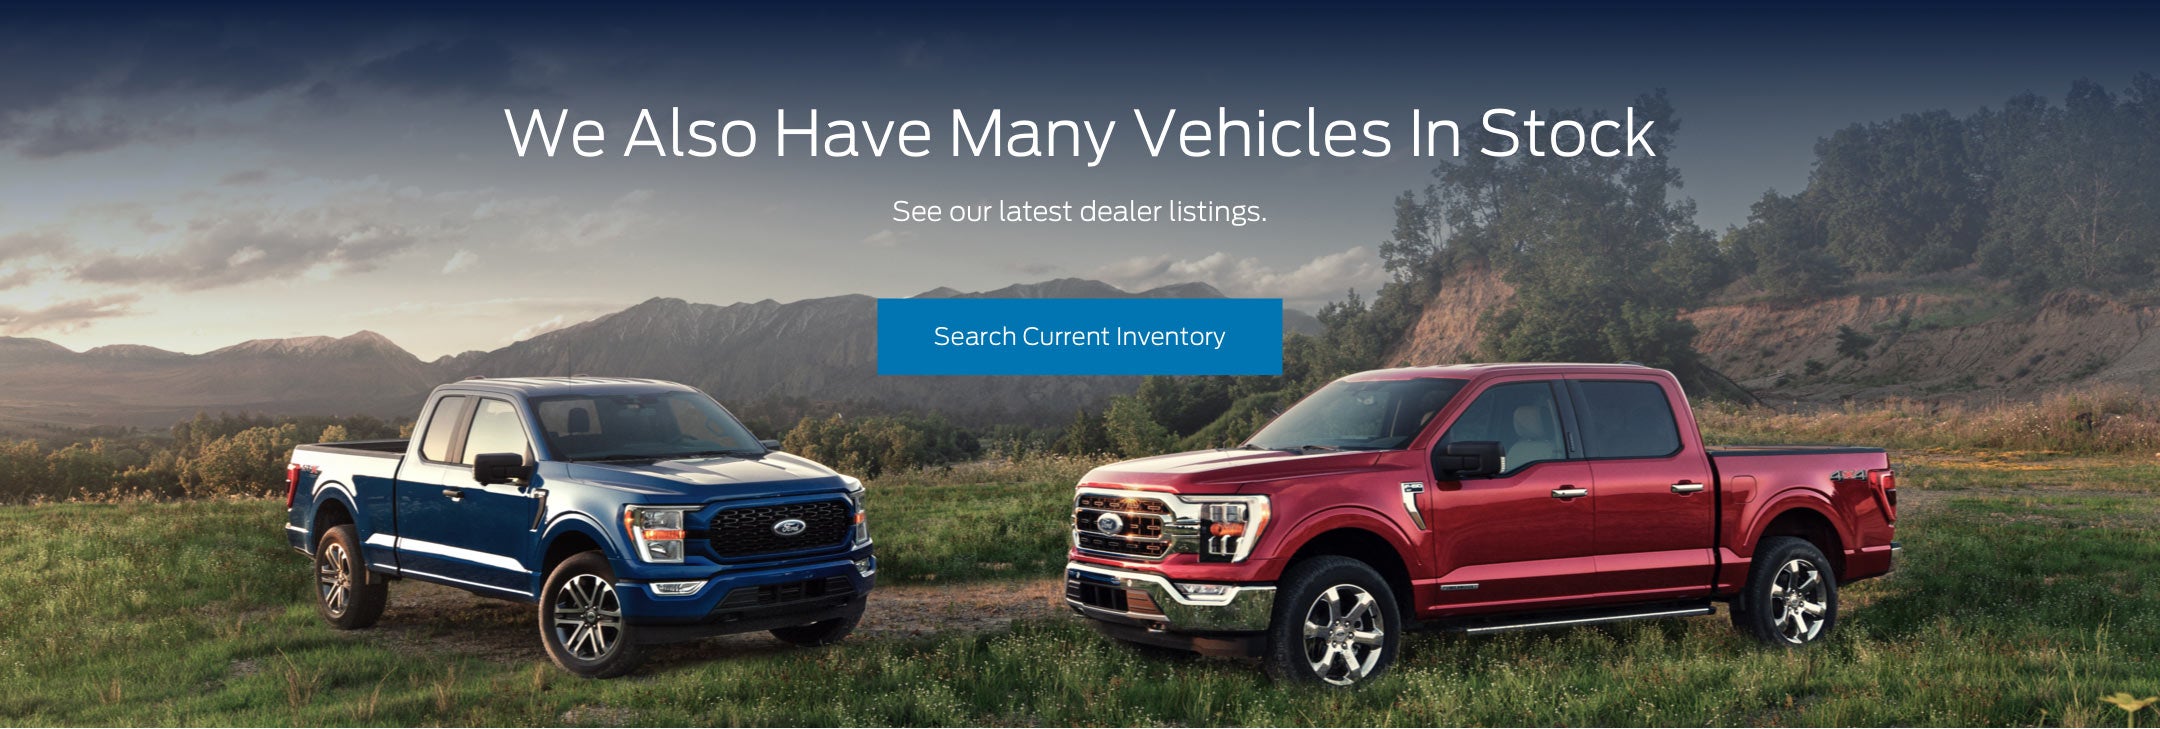 Ford vehicles in stock | Bonanza Ford, Inc. in Wray CO